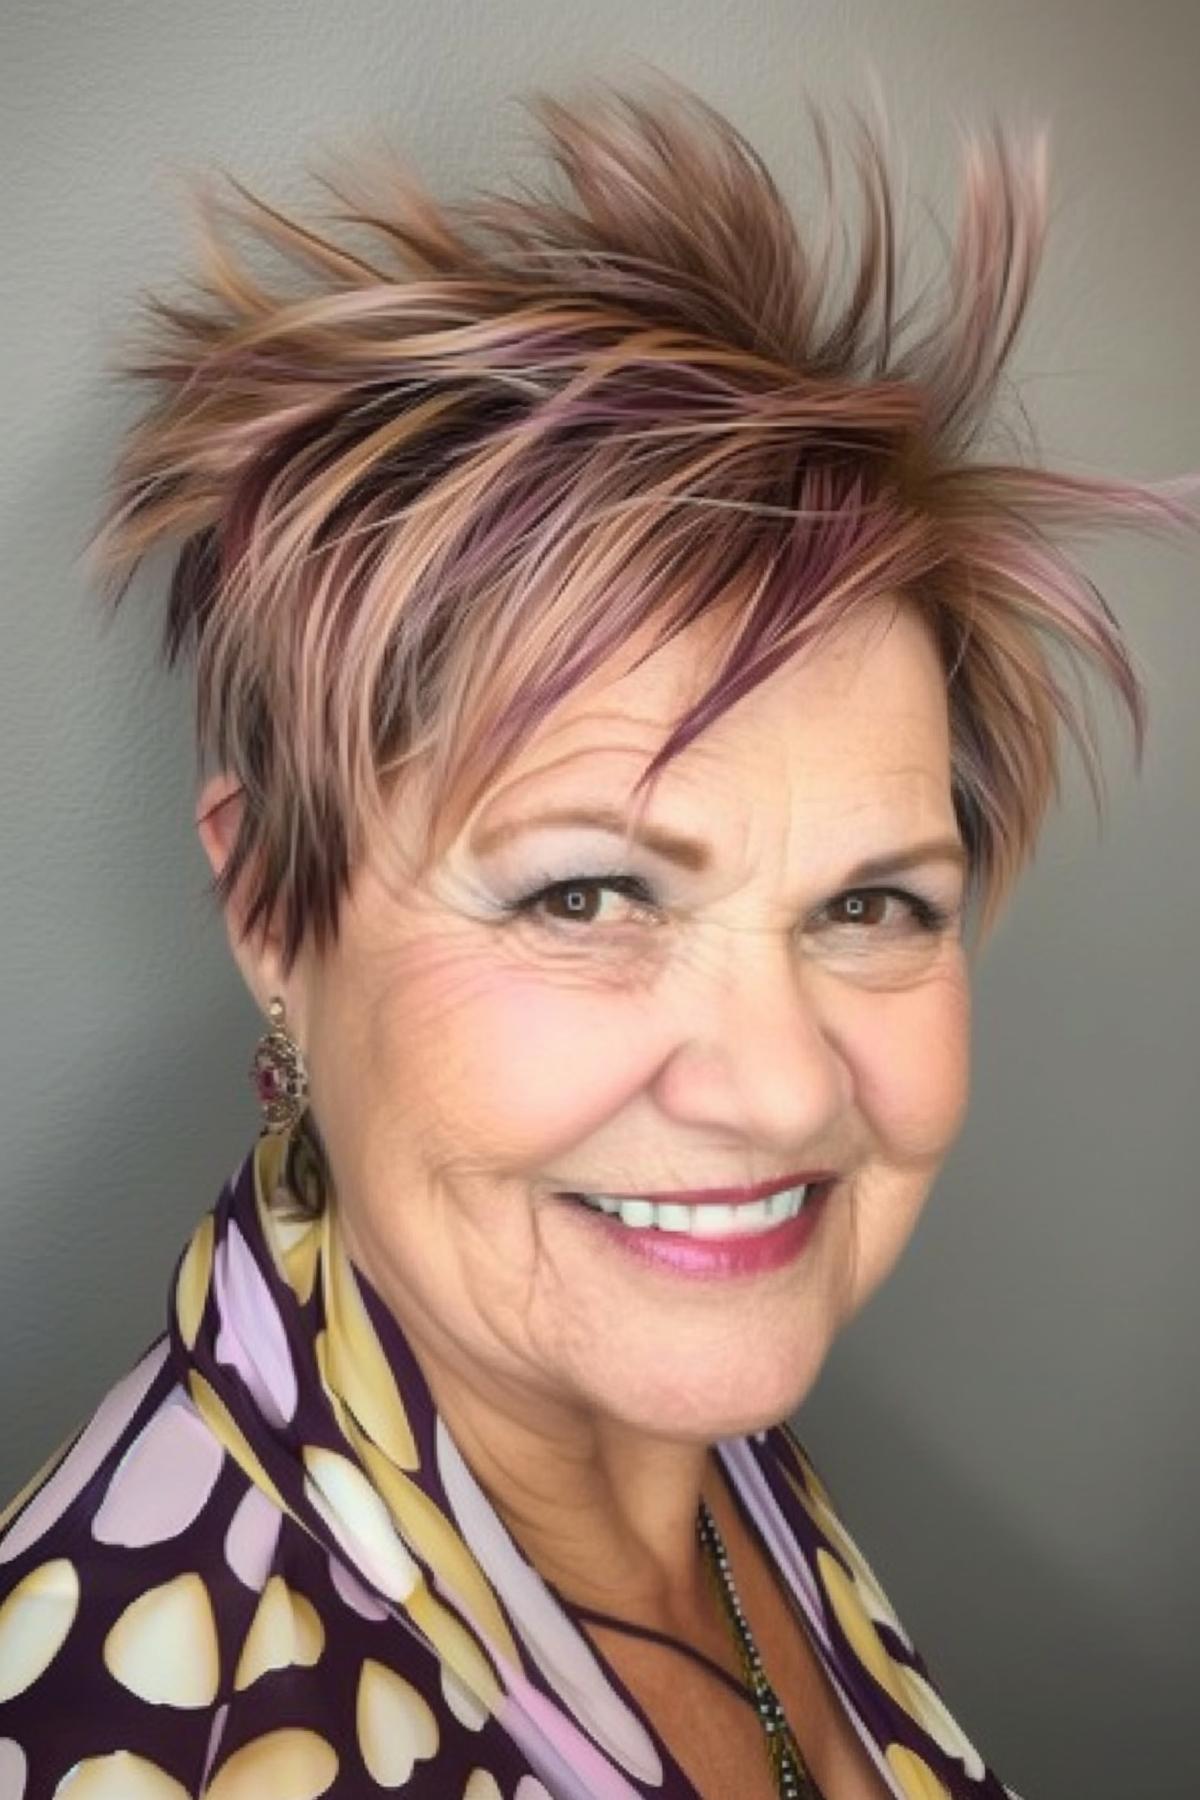 A mature woman with a pixie cut and bold, textured bangs with playful purple highlights.